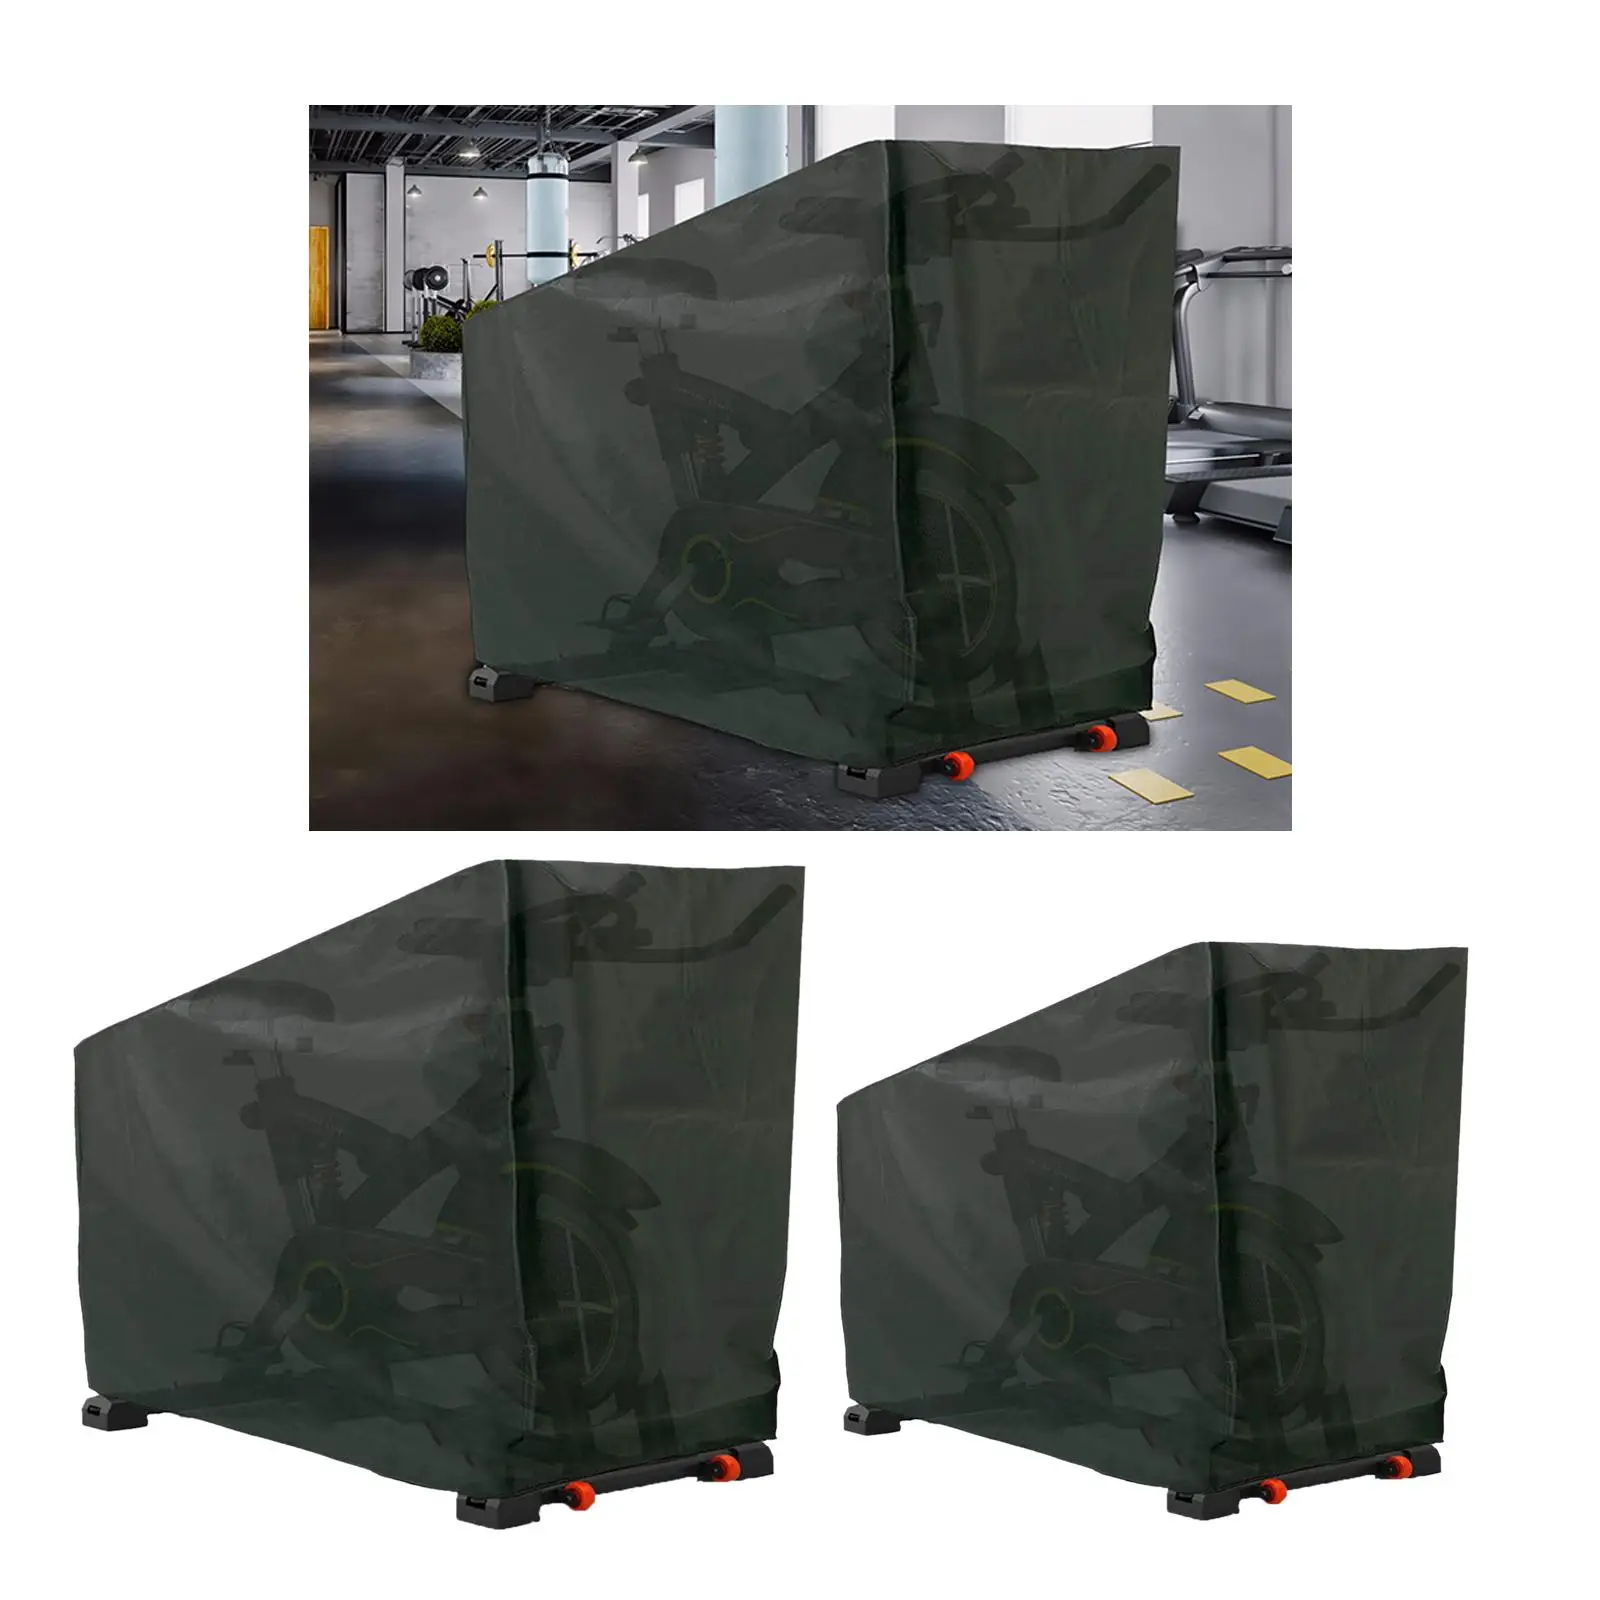 Indoor Cycling Stationary Cover Storage Cover Oxford Universal Wind Proof Waterproof Dust Cover for Outside Home Storage